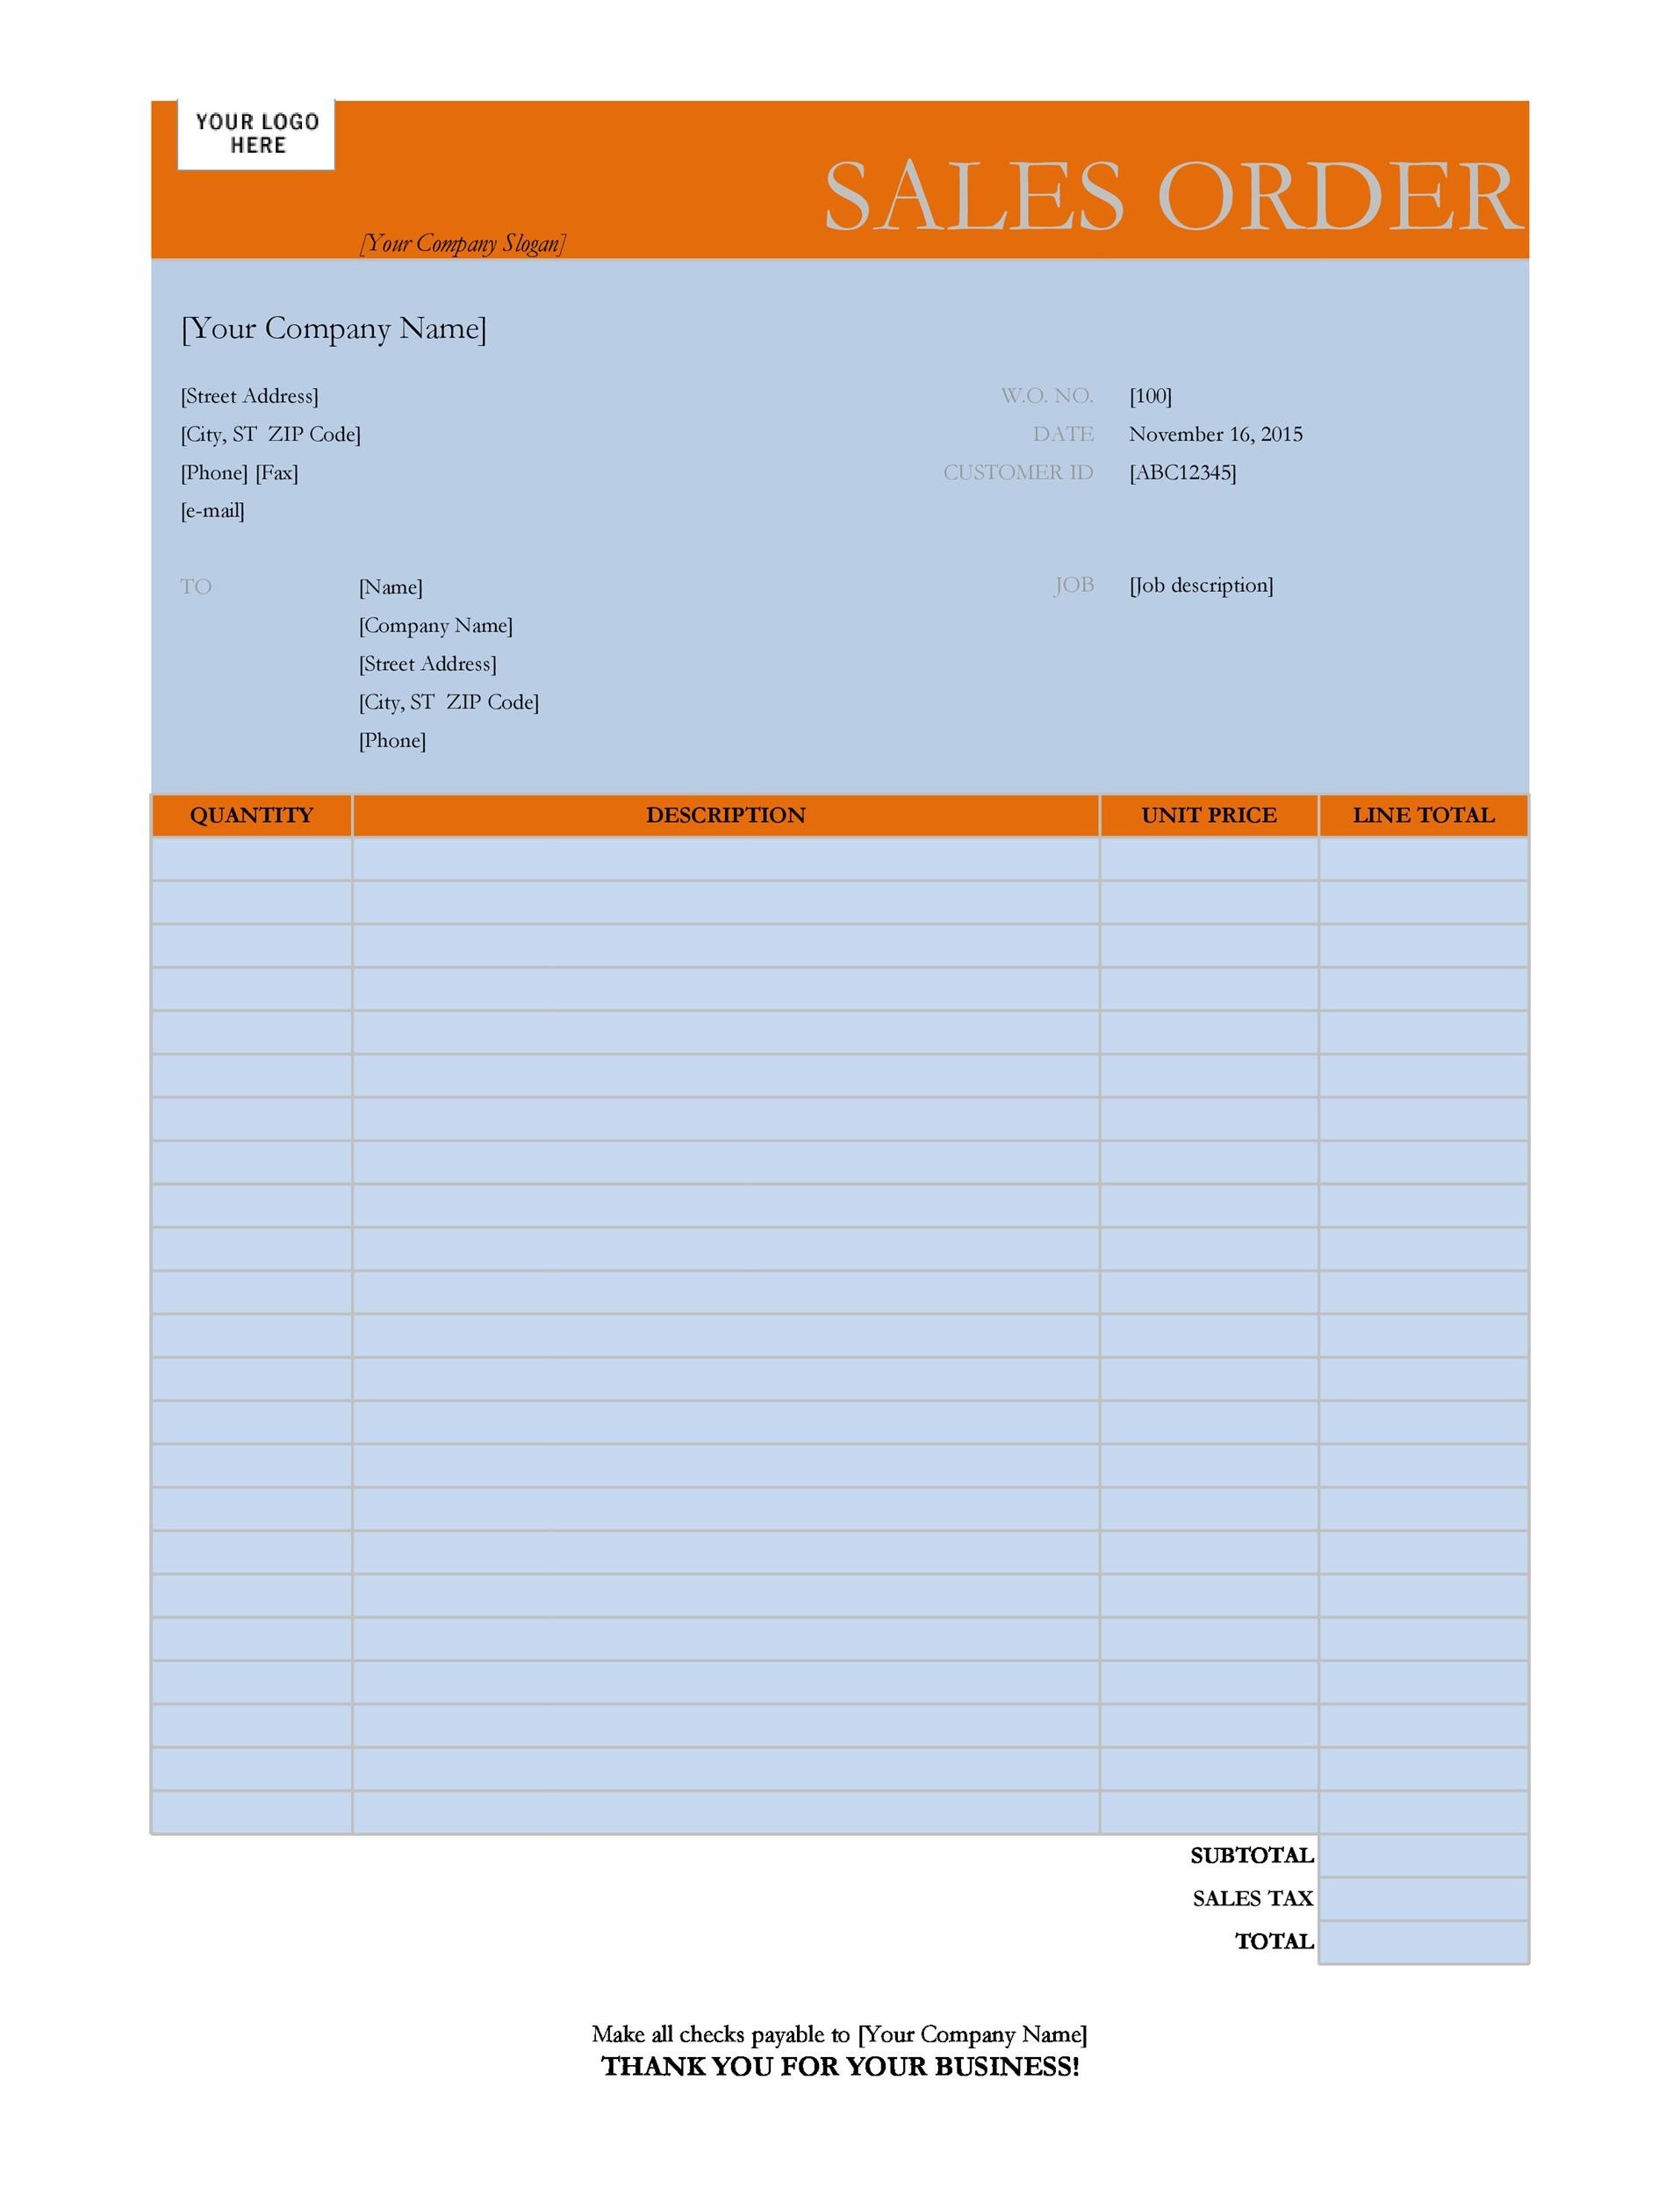 37-free-purchase-order-templates-in-word-excel